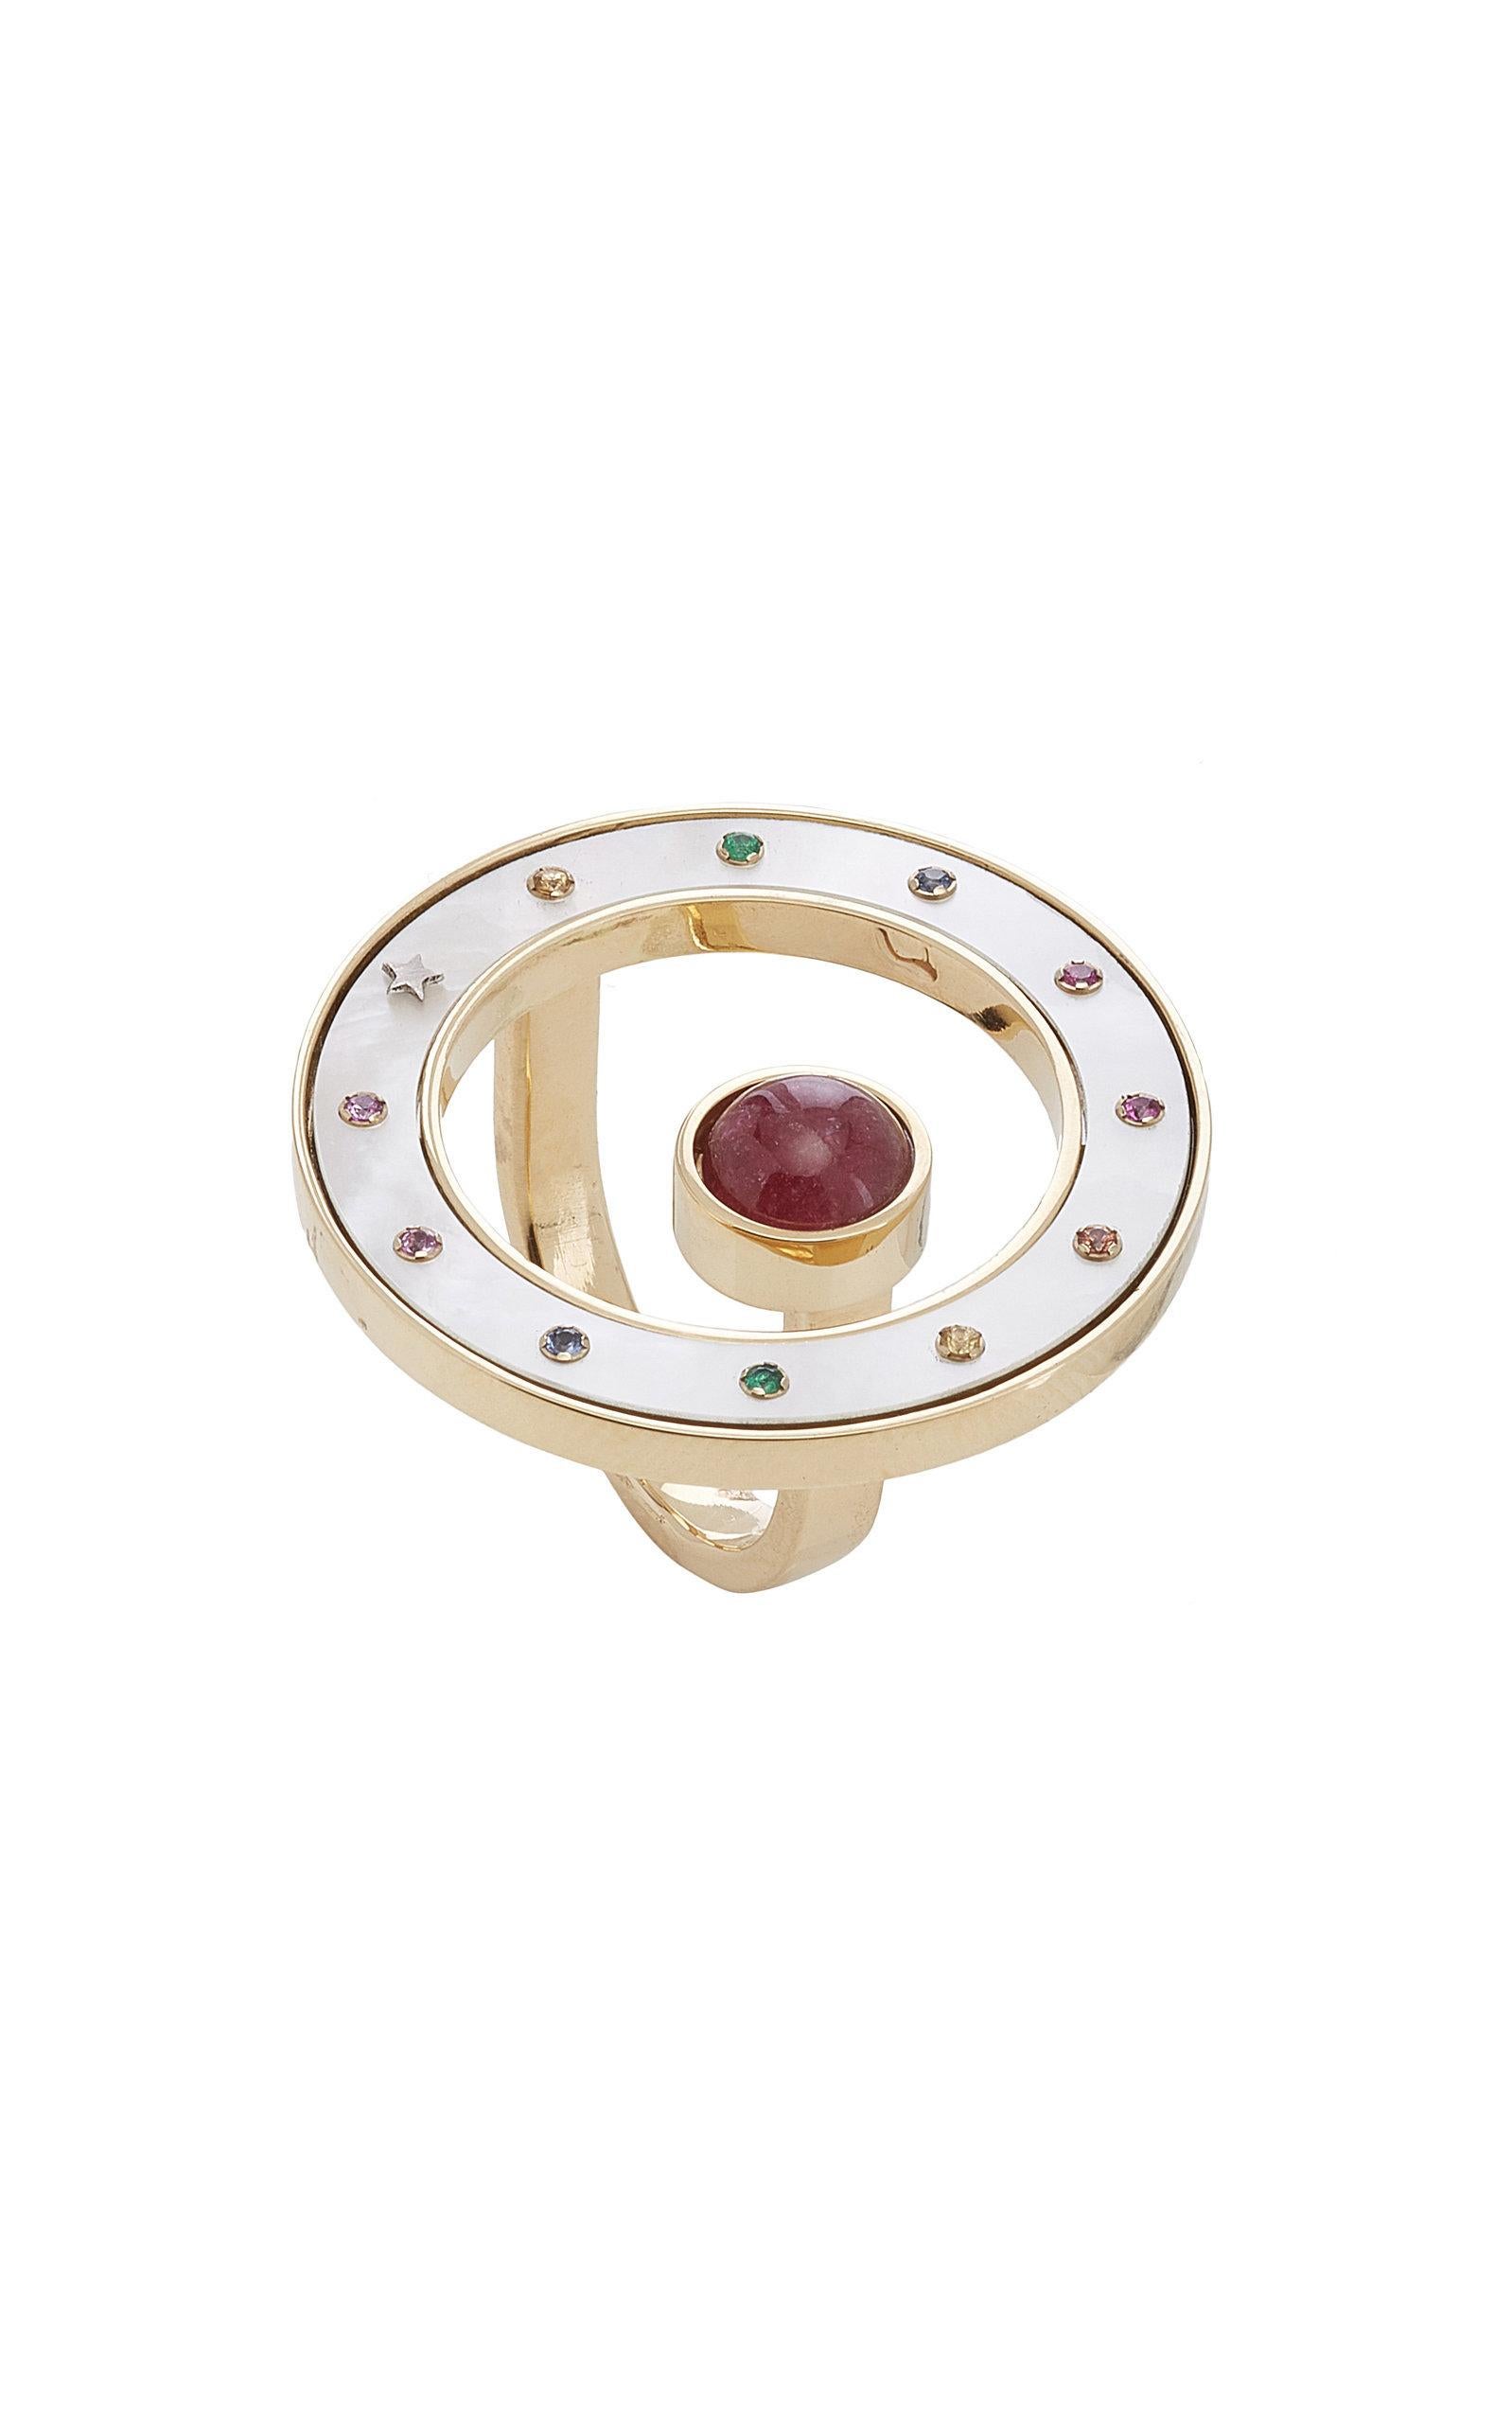 Inspired by the concept of time, Anna Maccieri Rossi's 'ORA Ring' features a circular mother of pearl dial with tourmaline cabochon at center. The 11 multicolored sapphires and a gold star at 8 o'clock are markers of each hour of the day. Slips on.